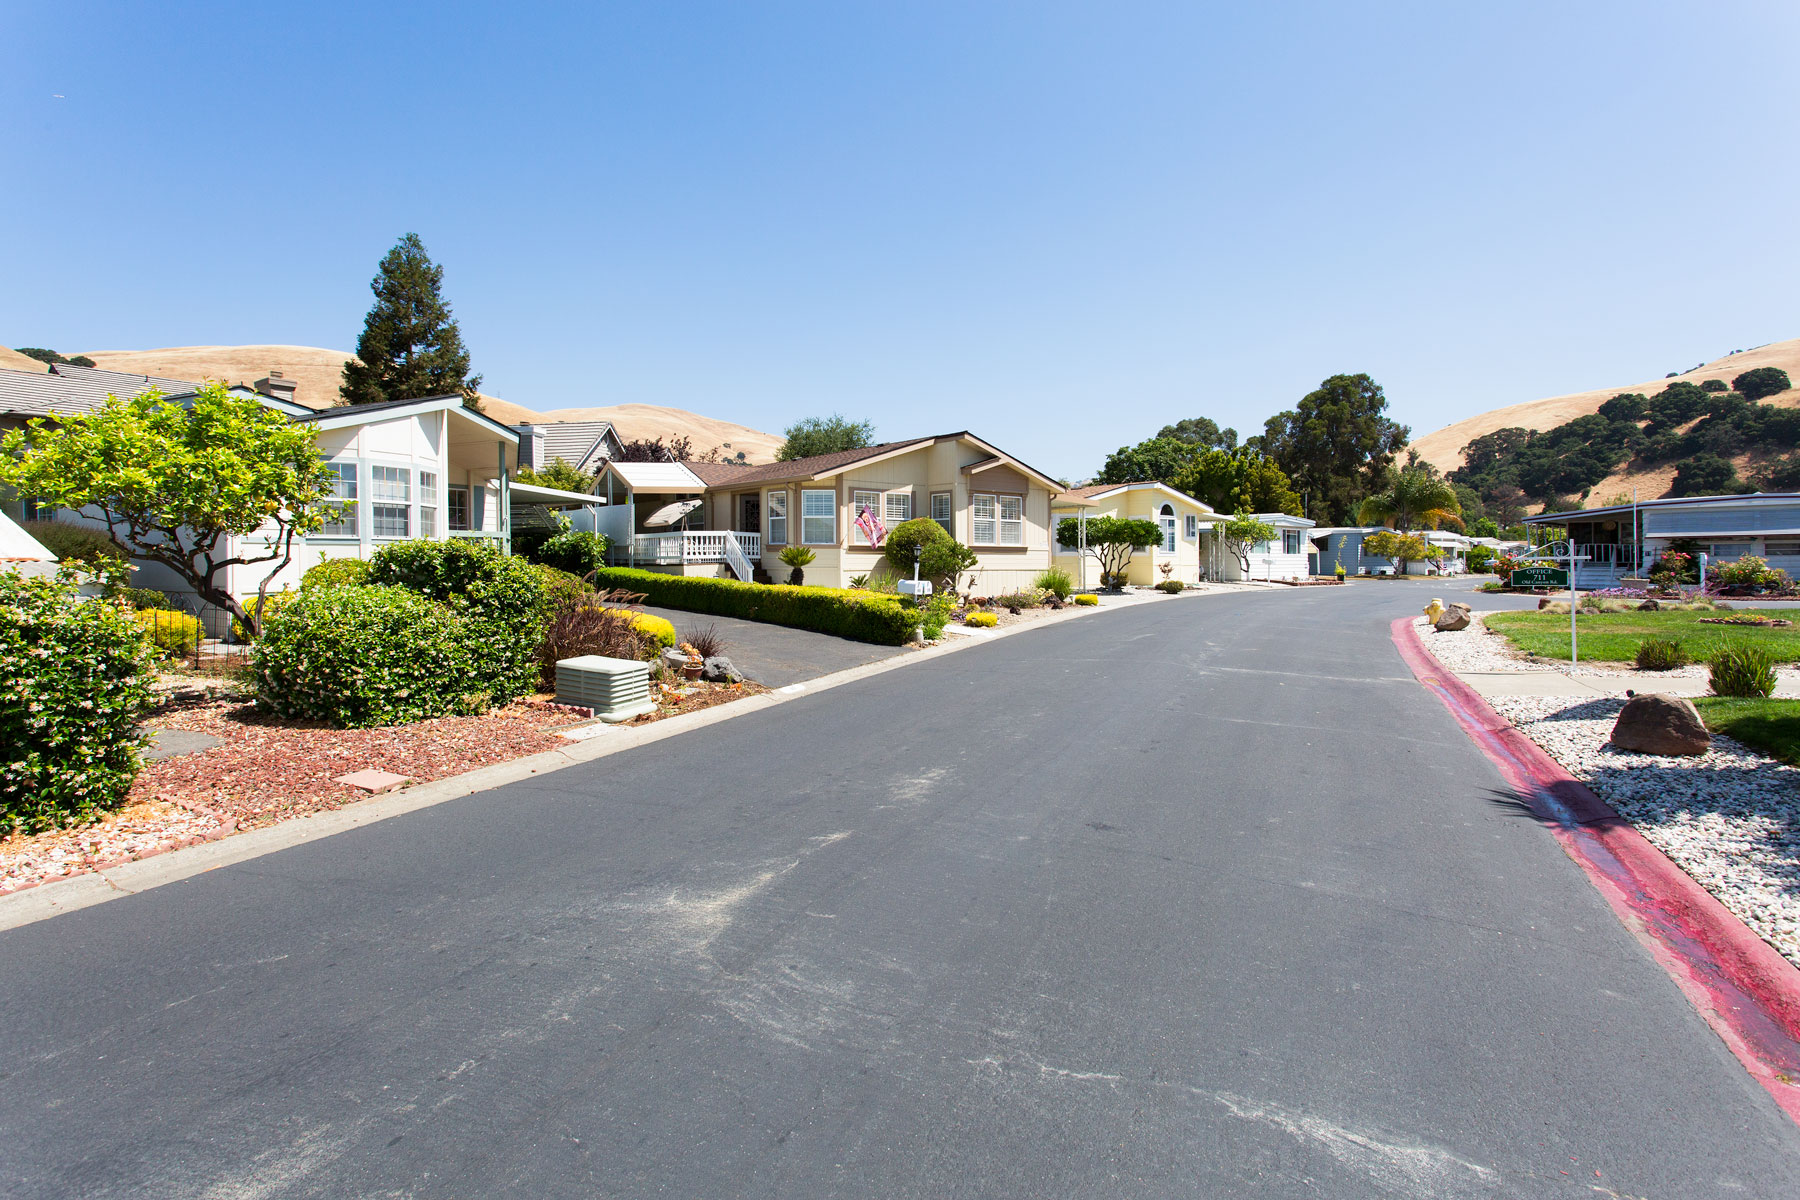 Beautiful manufactured homes line the wide, paved streets of the community. Each home has a unique character, with differing styles and front landscape.